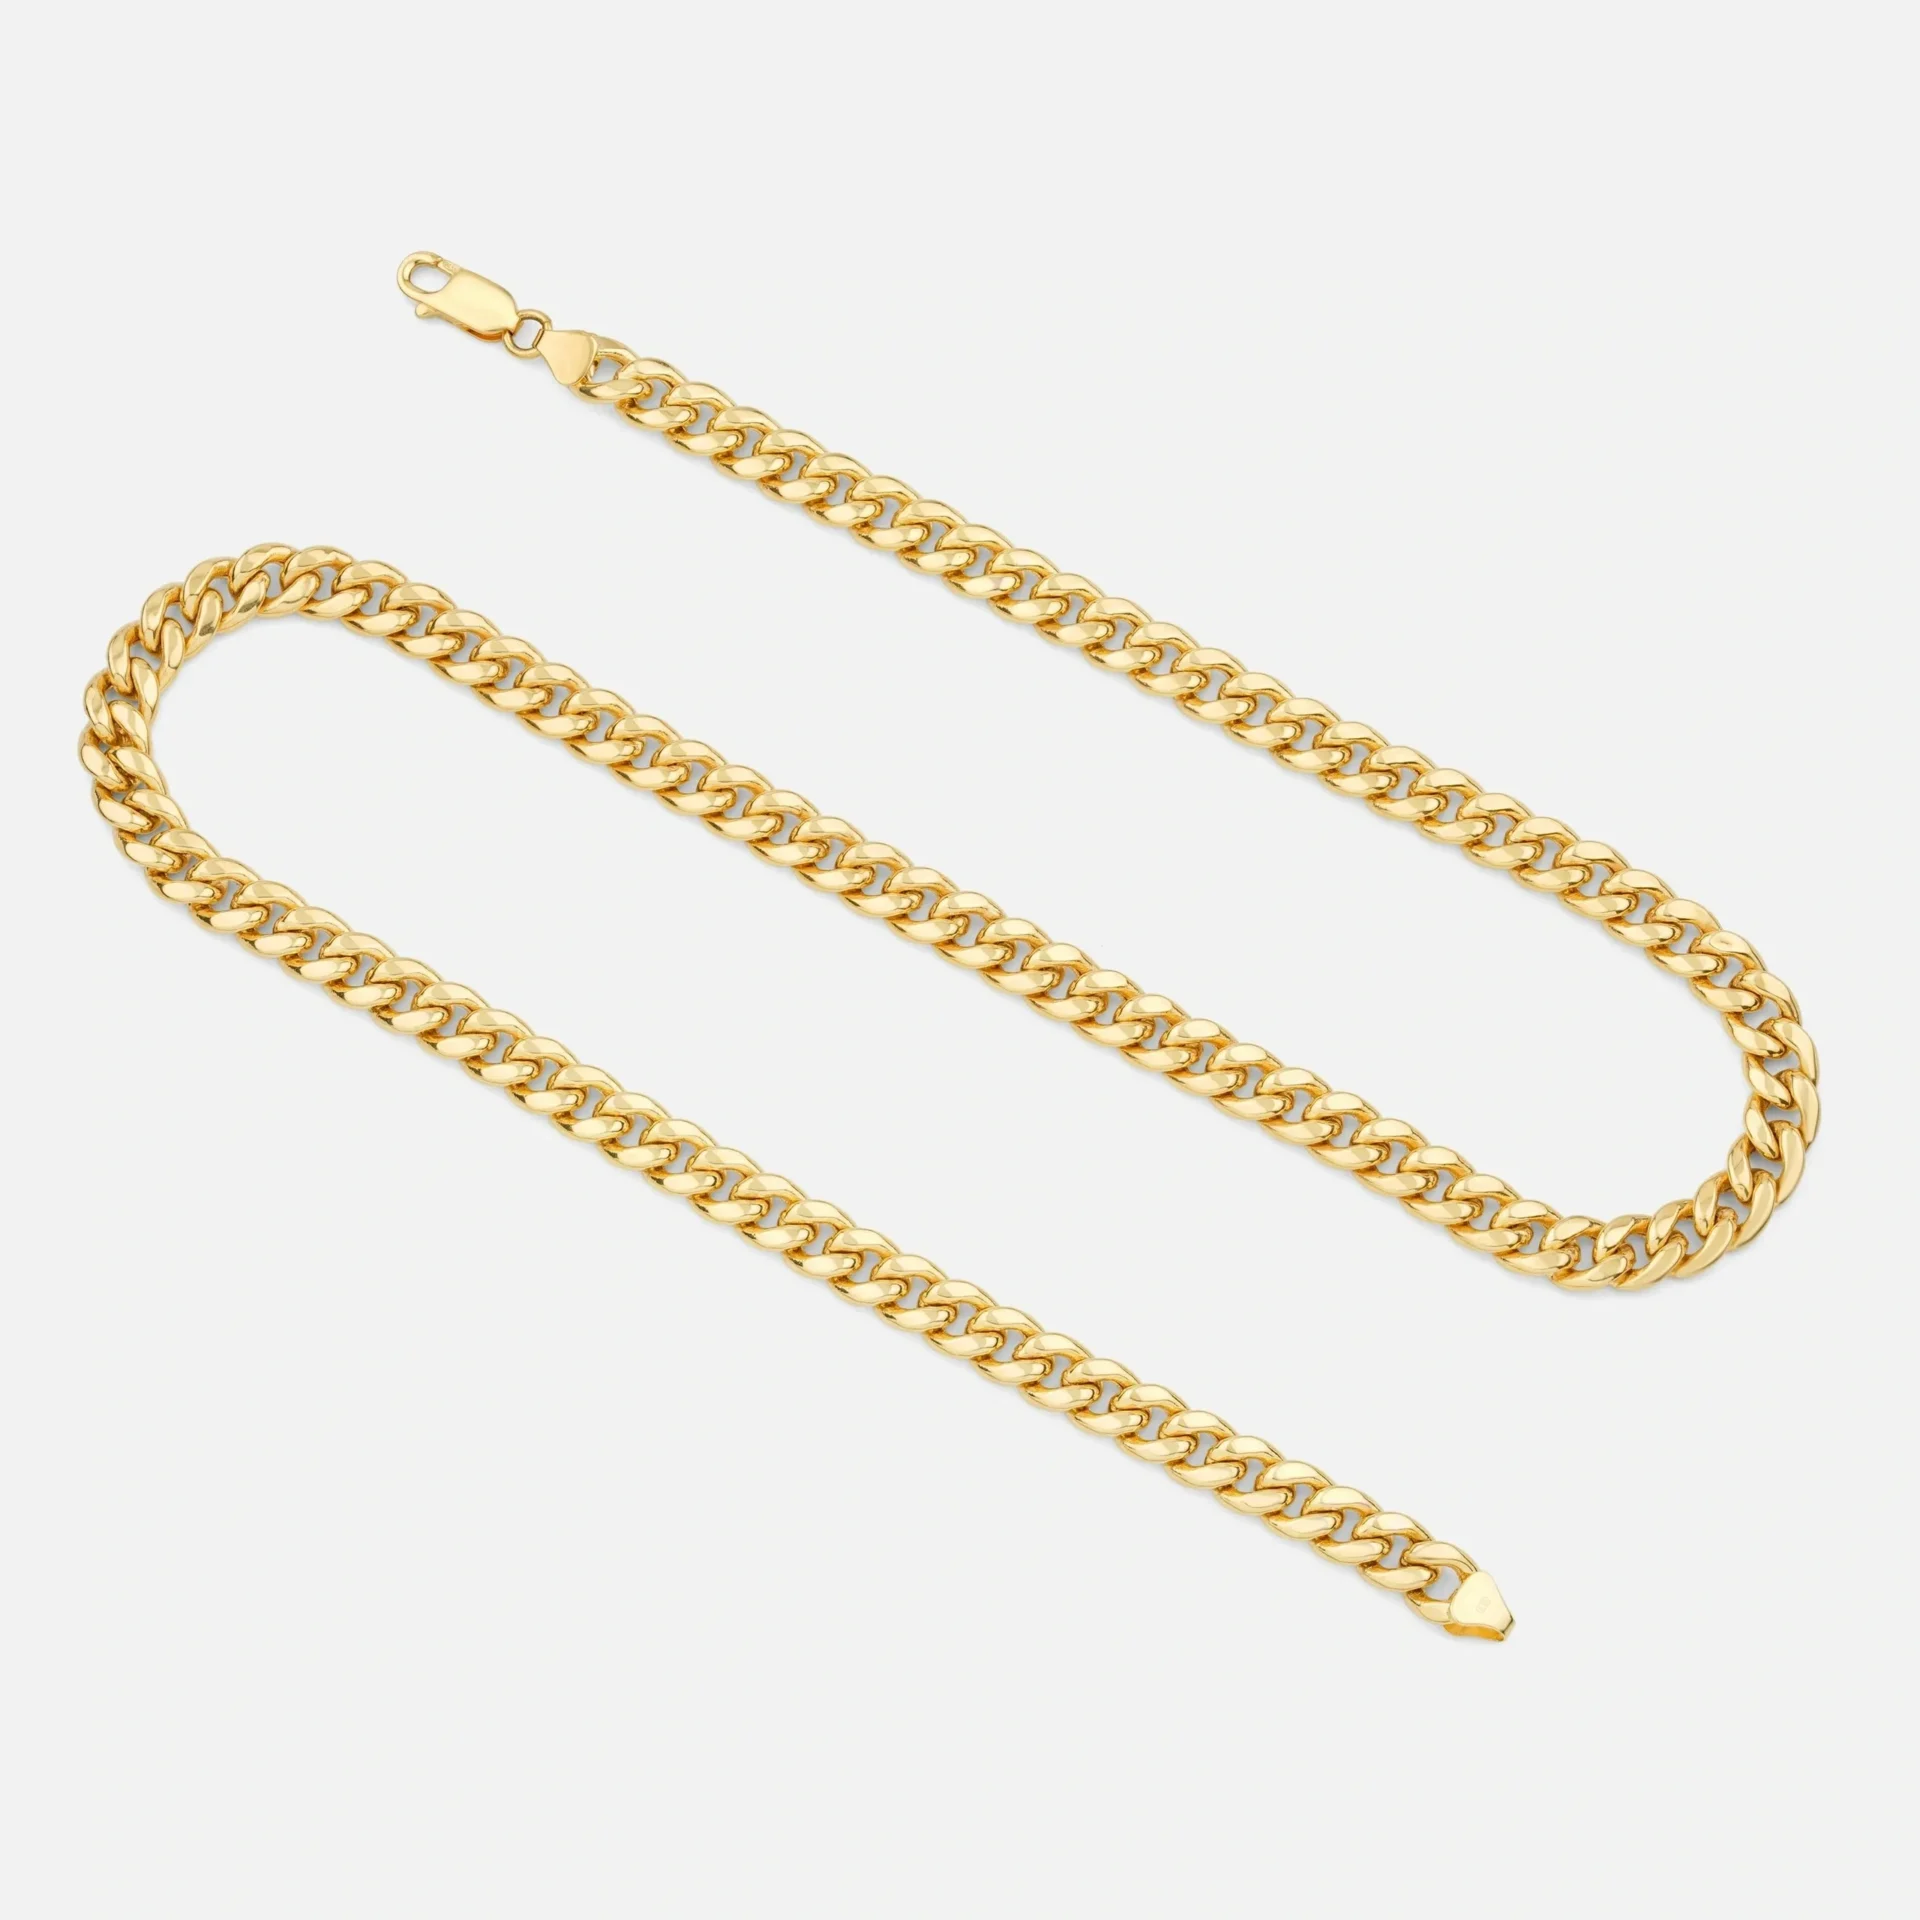 A gold chain is shown with one end missing.